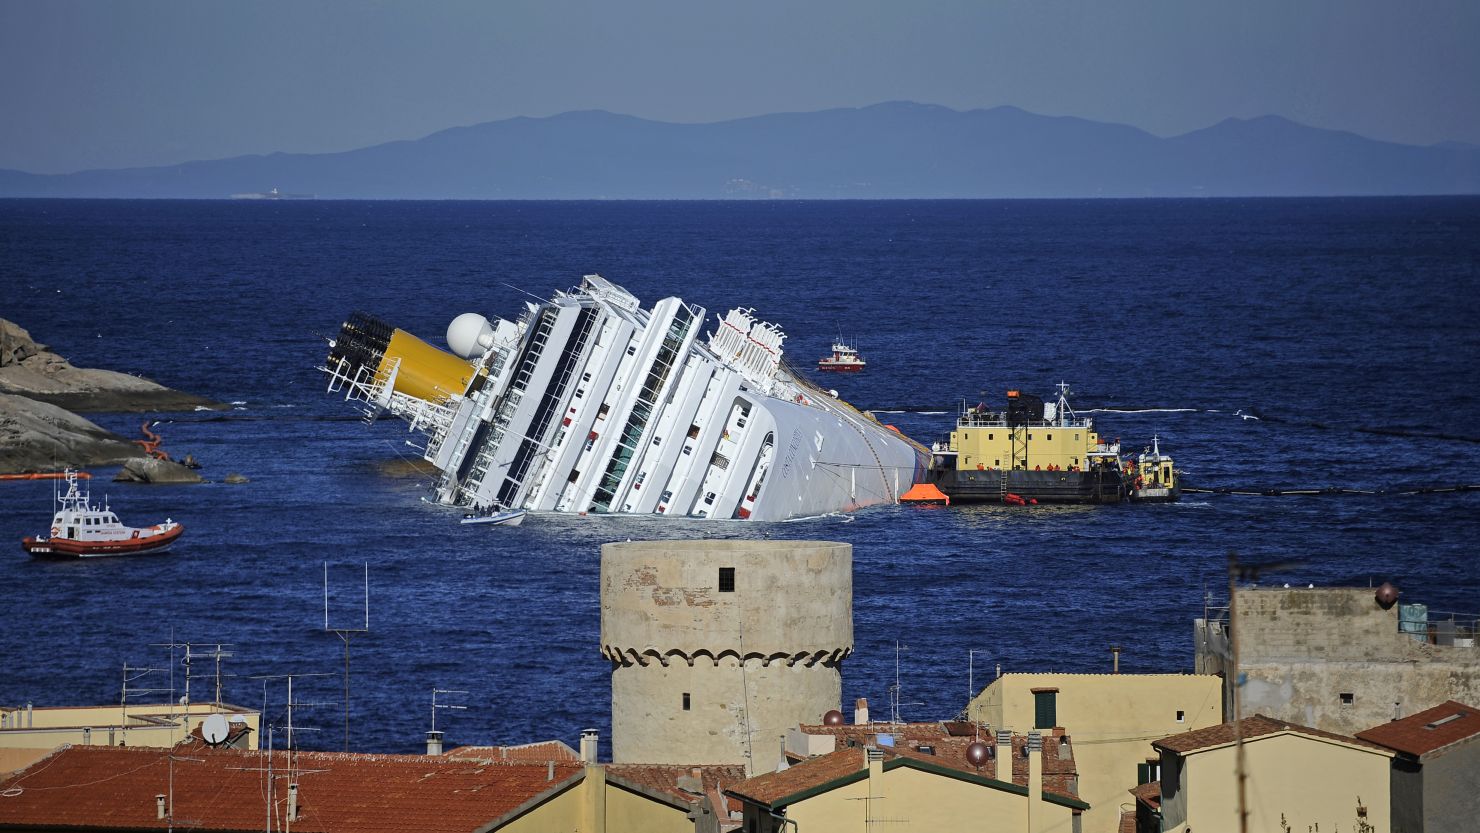 The cruise liner Costa Concordia, seen on January 25 hit rocks and sank off the coast of Italy's Giglio Island on January 13. 